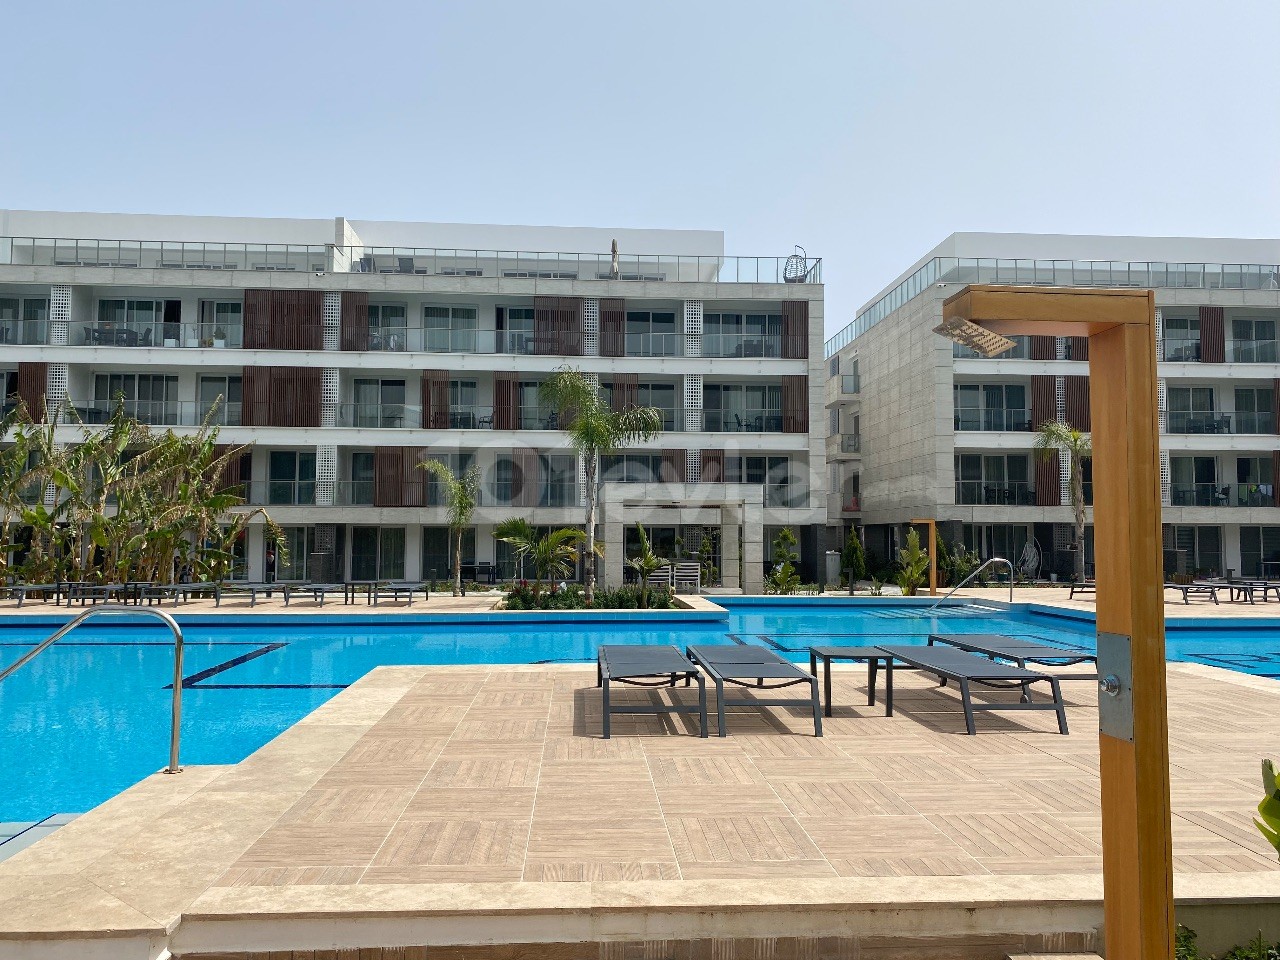 1 Bedroom Flat for Sale in a Luxury Complex 500m from Long Beach ** 